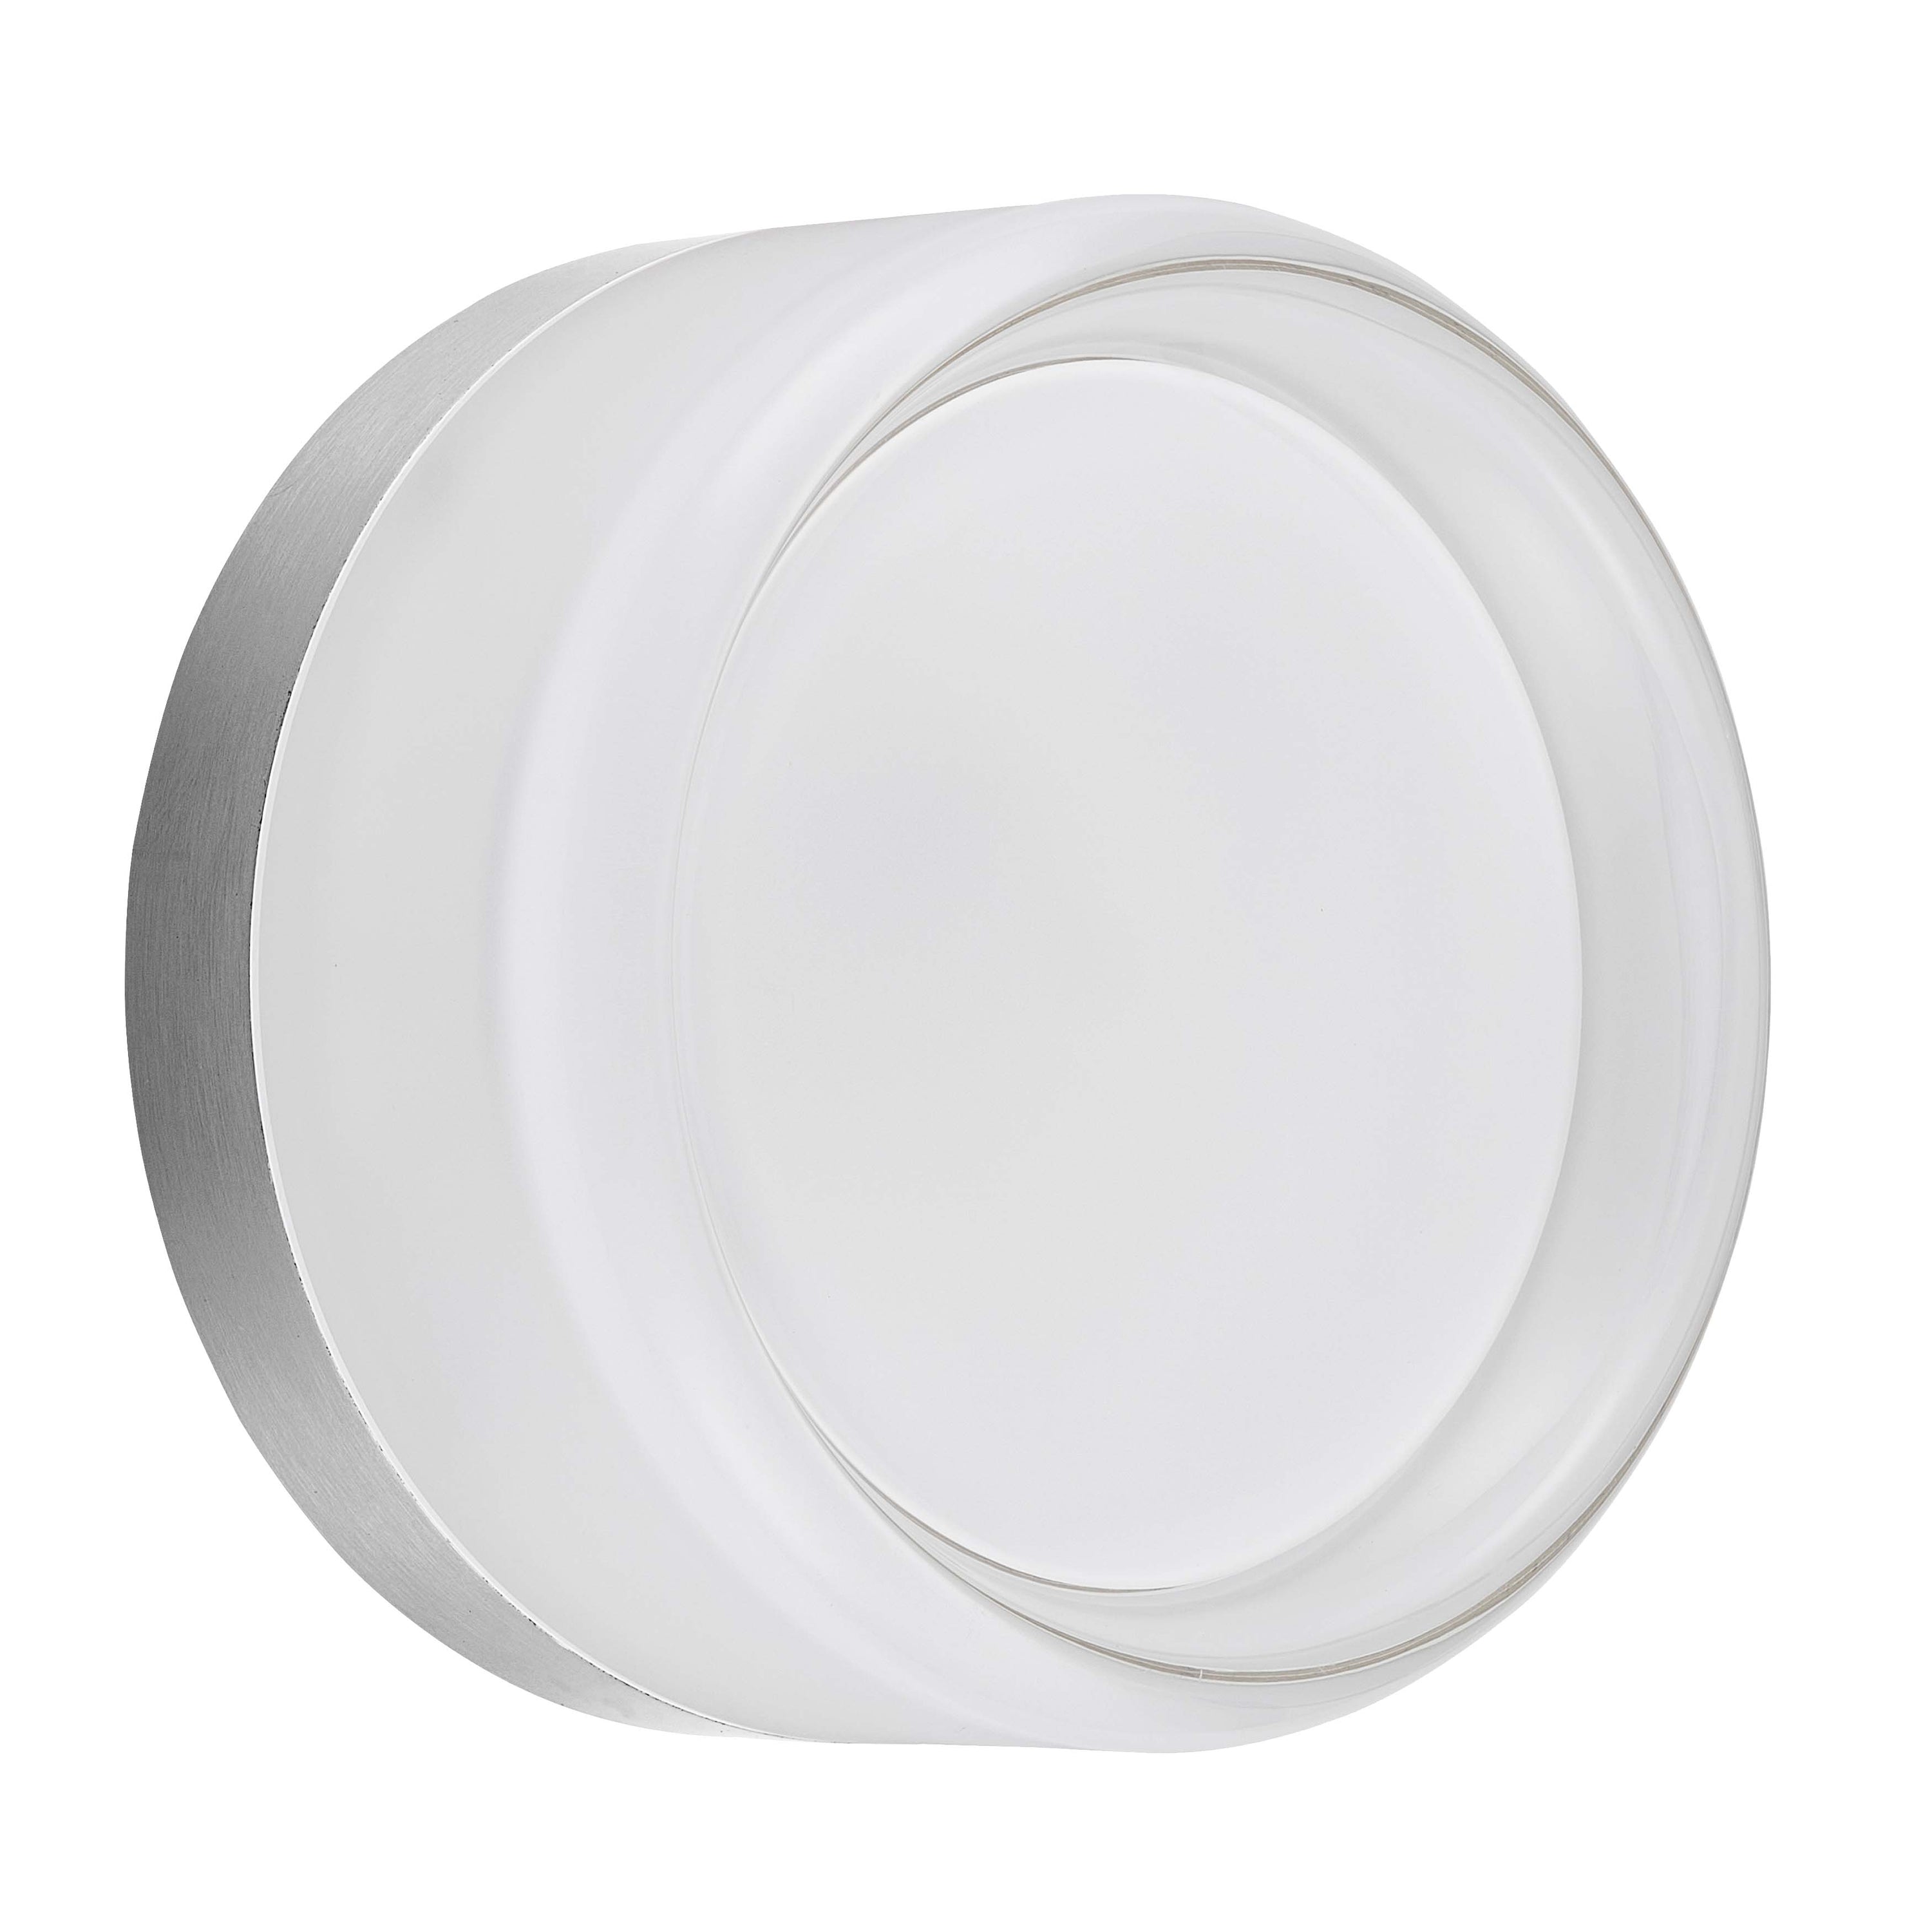 Dainolite LUC-515LEDW-PC 15W Wall Sconce Polished Chrome with Clear & Frosted Acrylic Diffuser